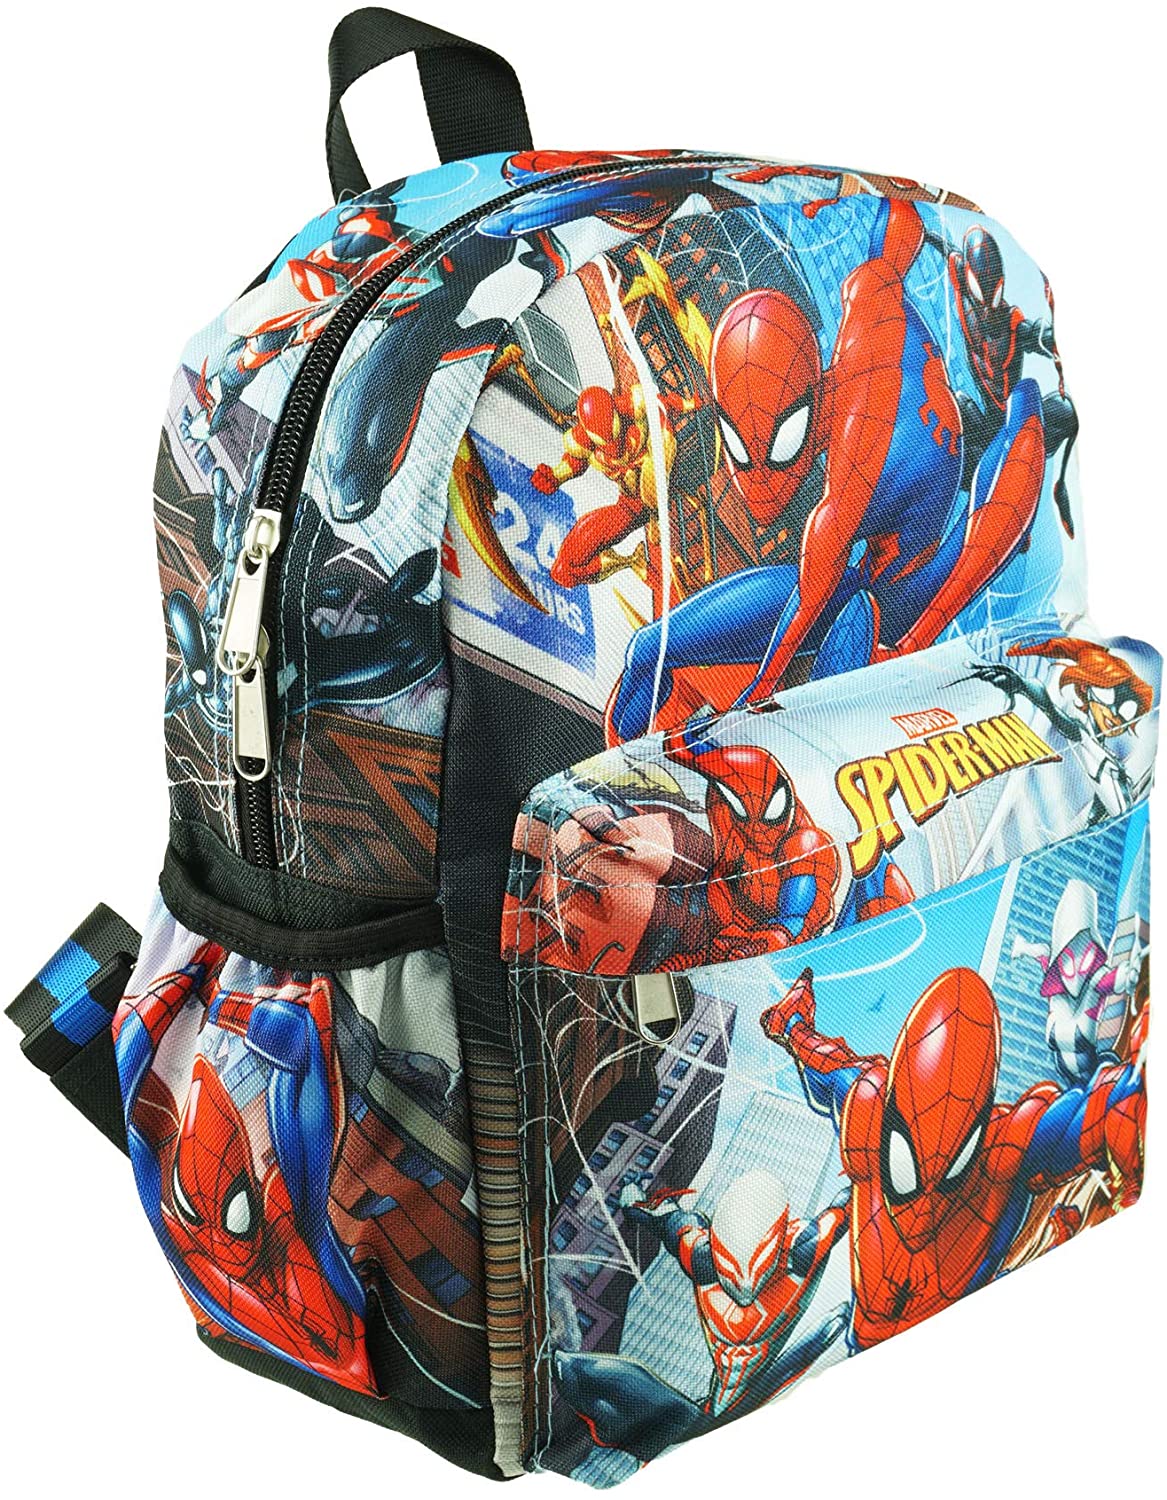 Spider-Man Deluxe Oversize Print 12" Backpack - A17729 - GTE Zone